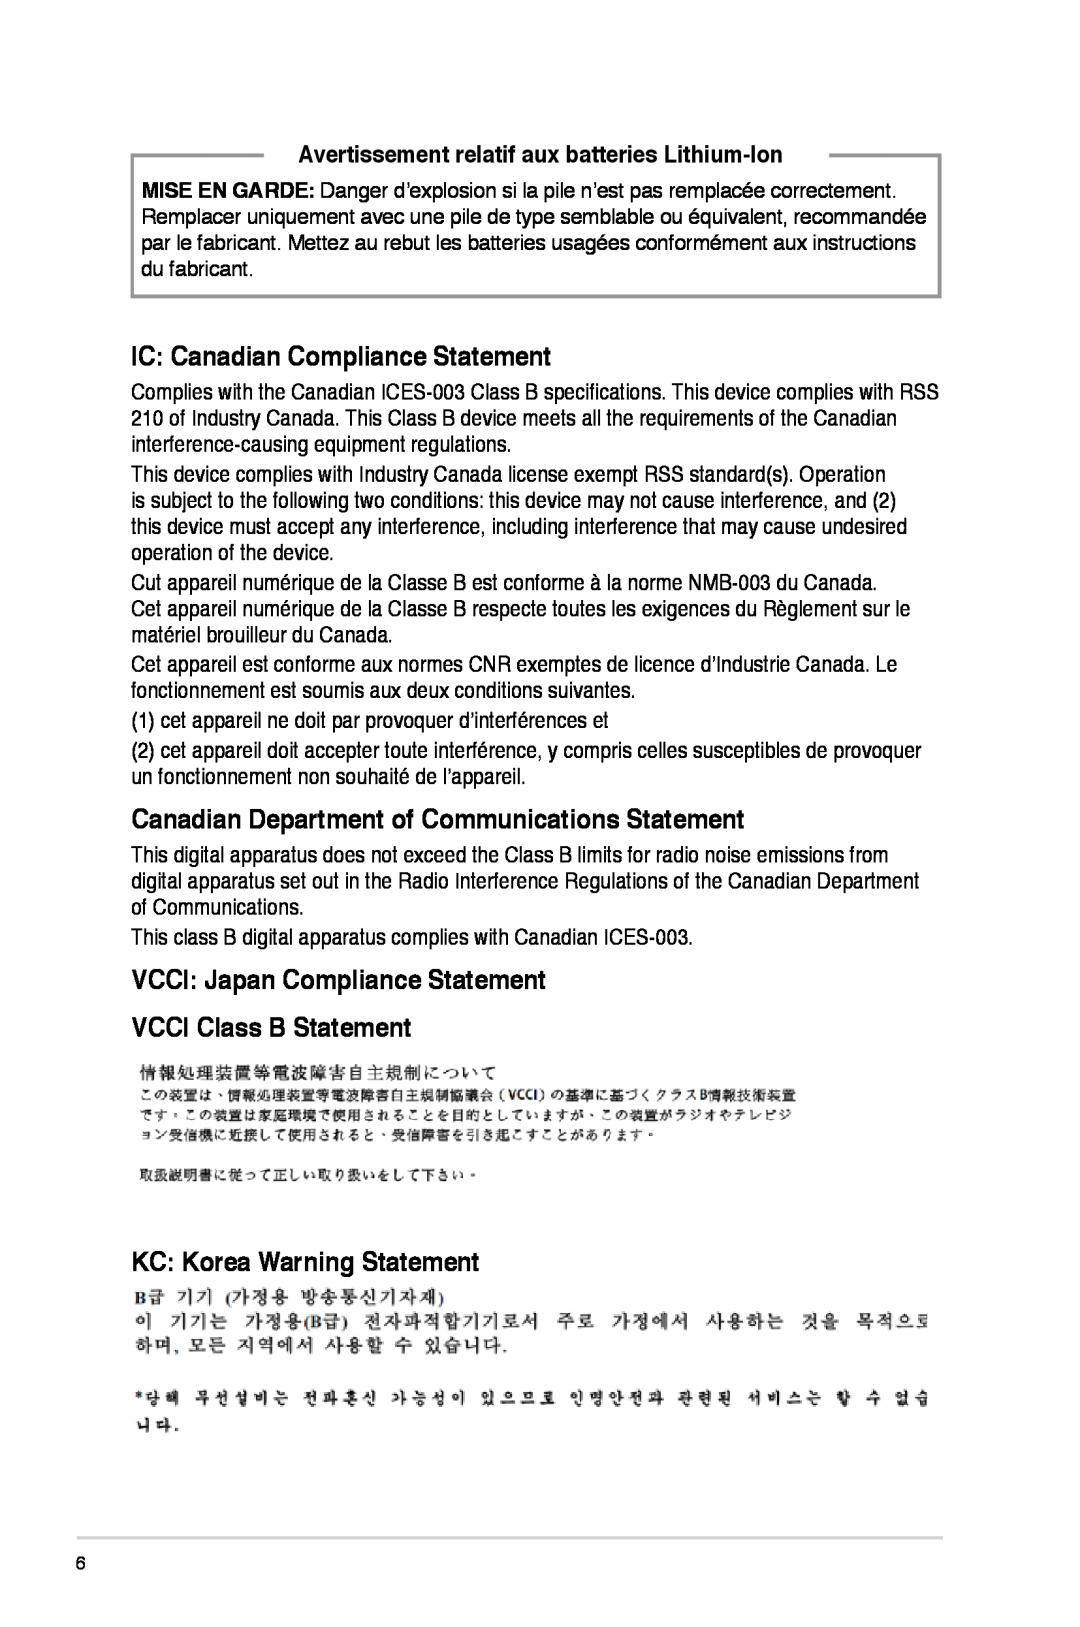 Asus M51AC-US006S, M51ACUS006S user manual IC Canadian Compliance Statement, Canadian Department of Communications Statement 